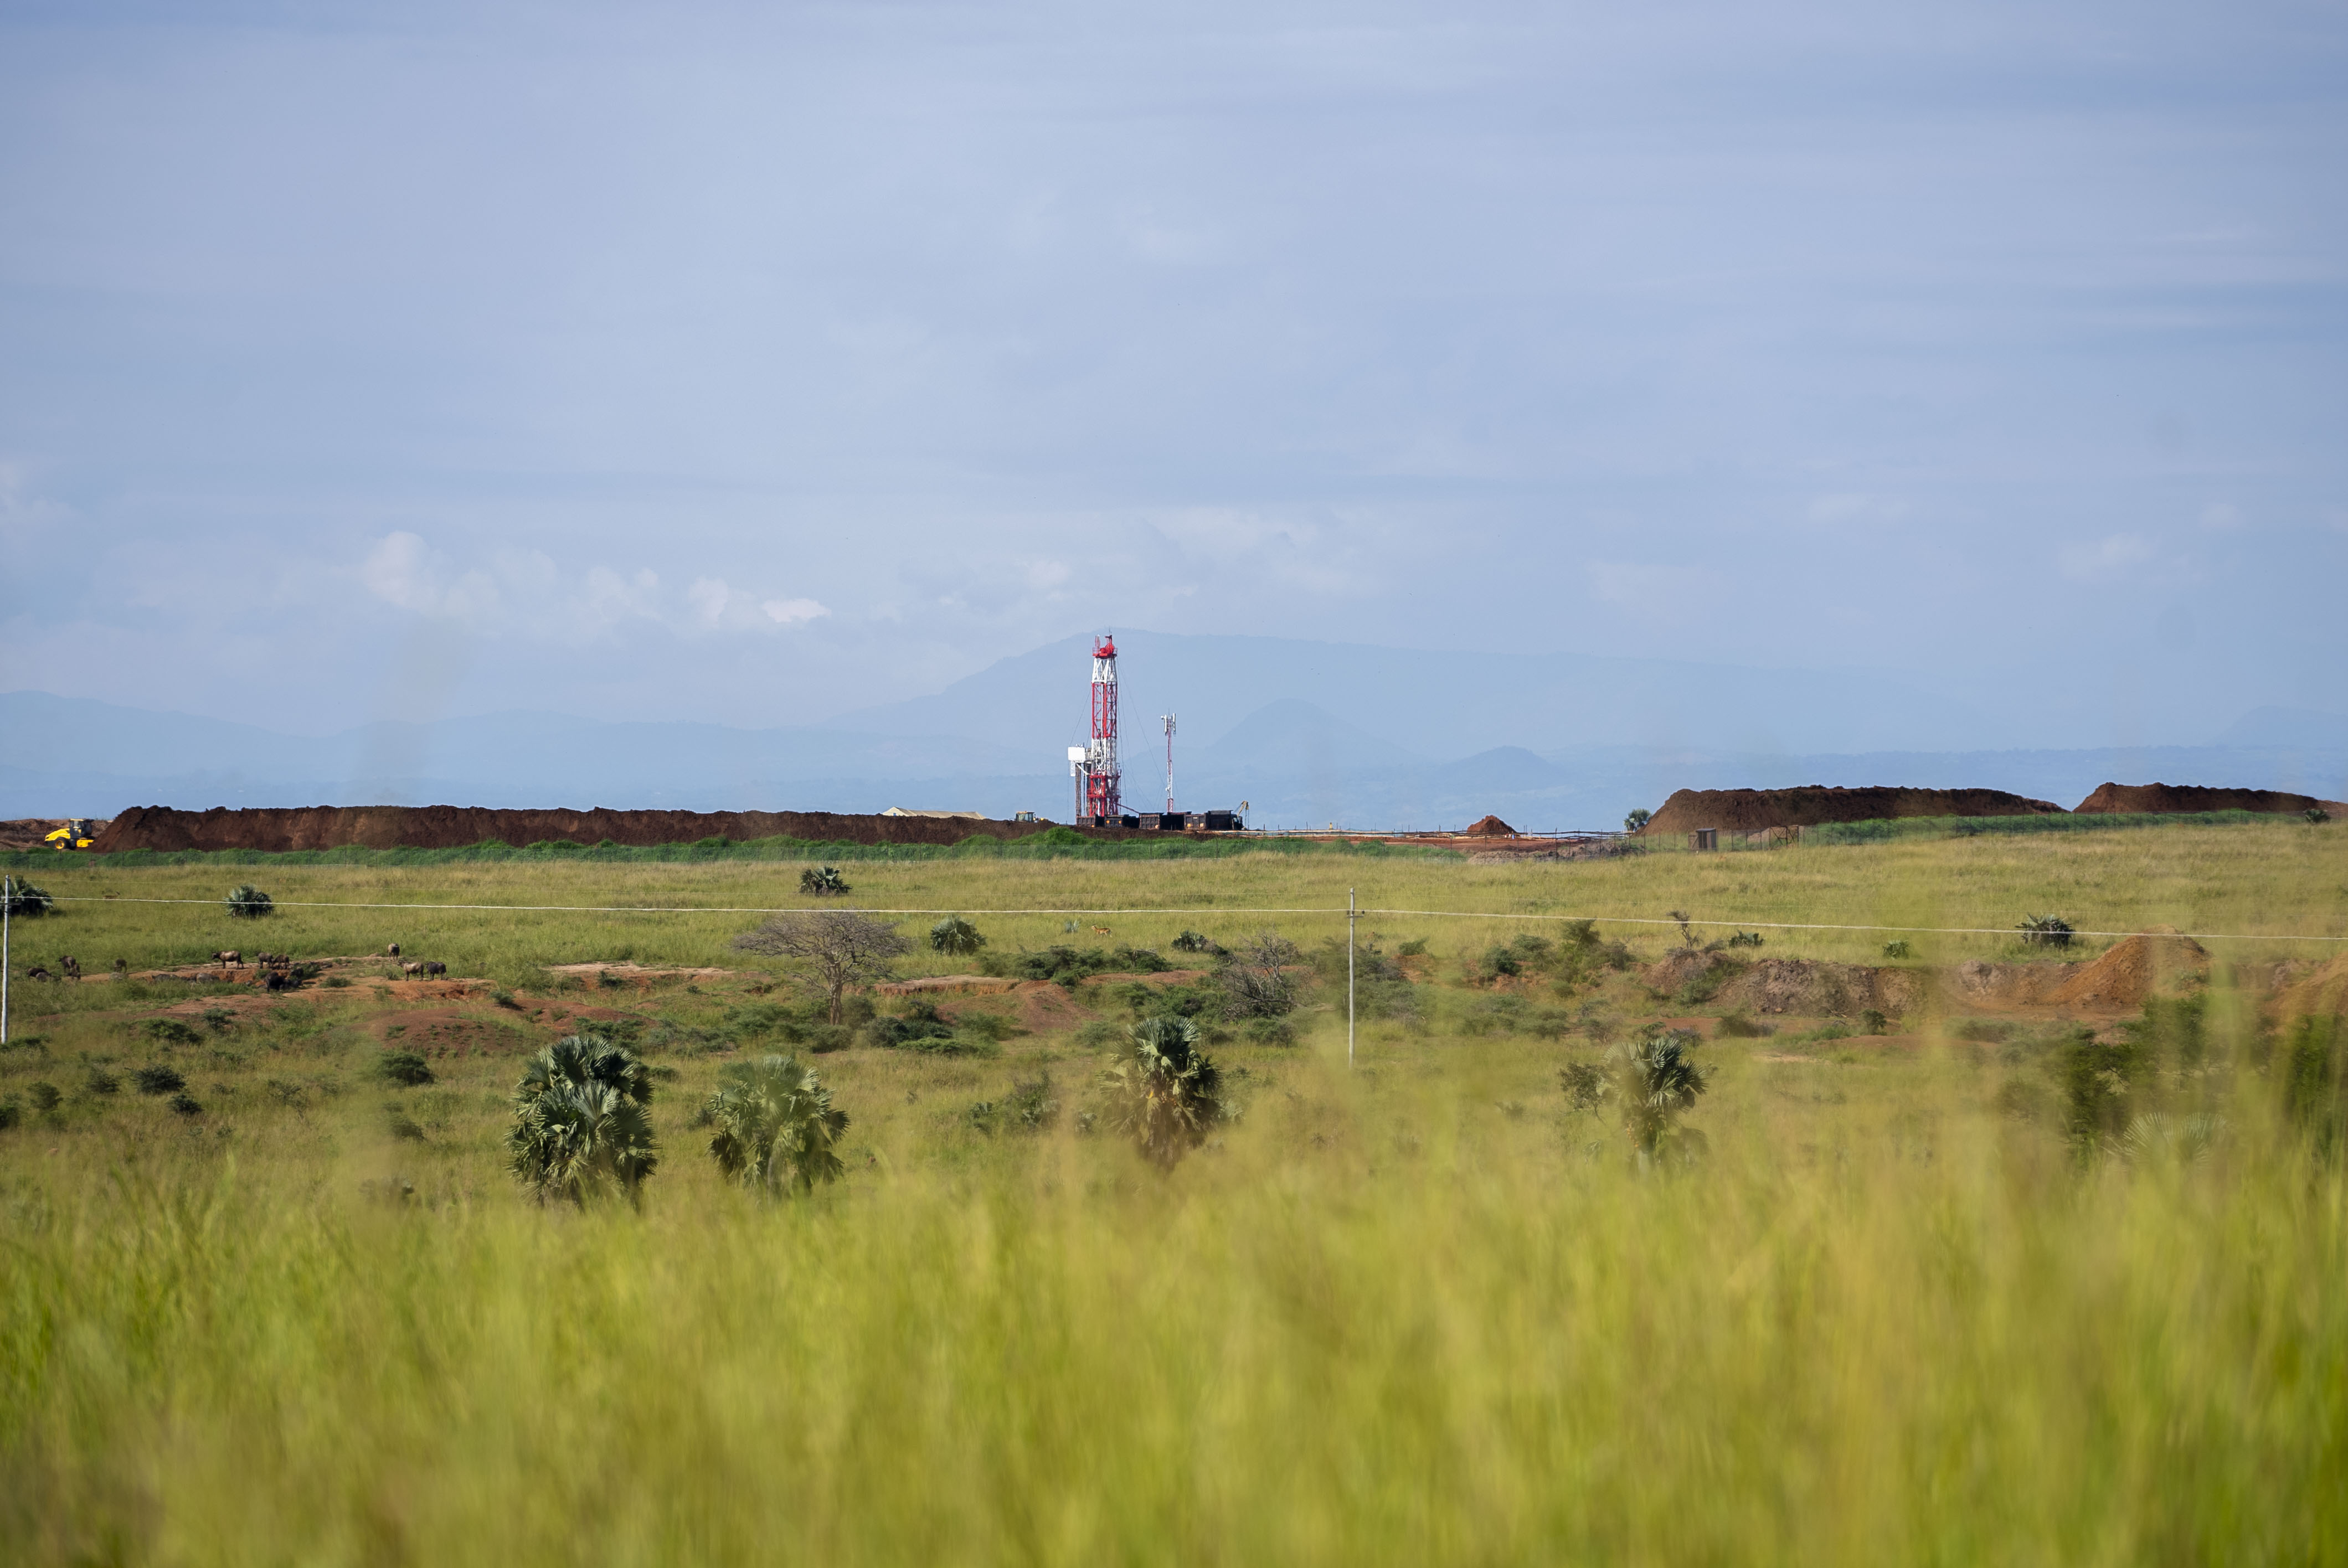 Oil drilling in Murchison National Park. Image credit: Courtesy of Stuart Spray